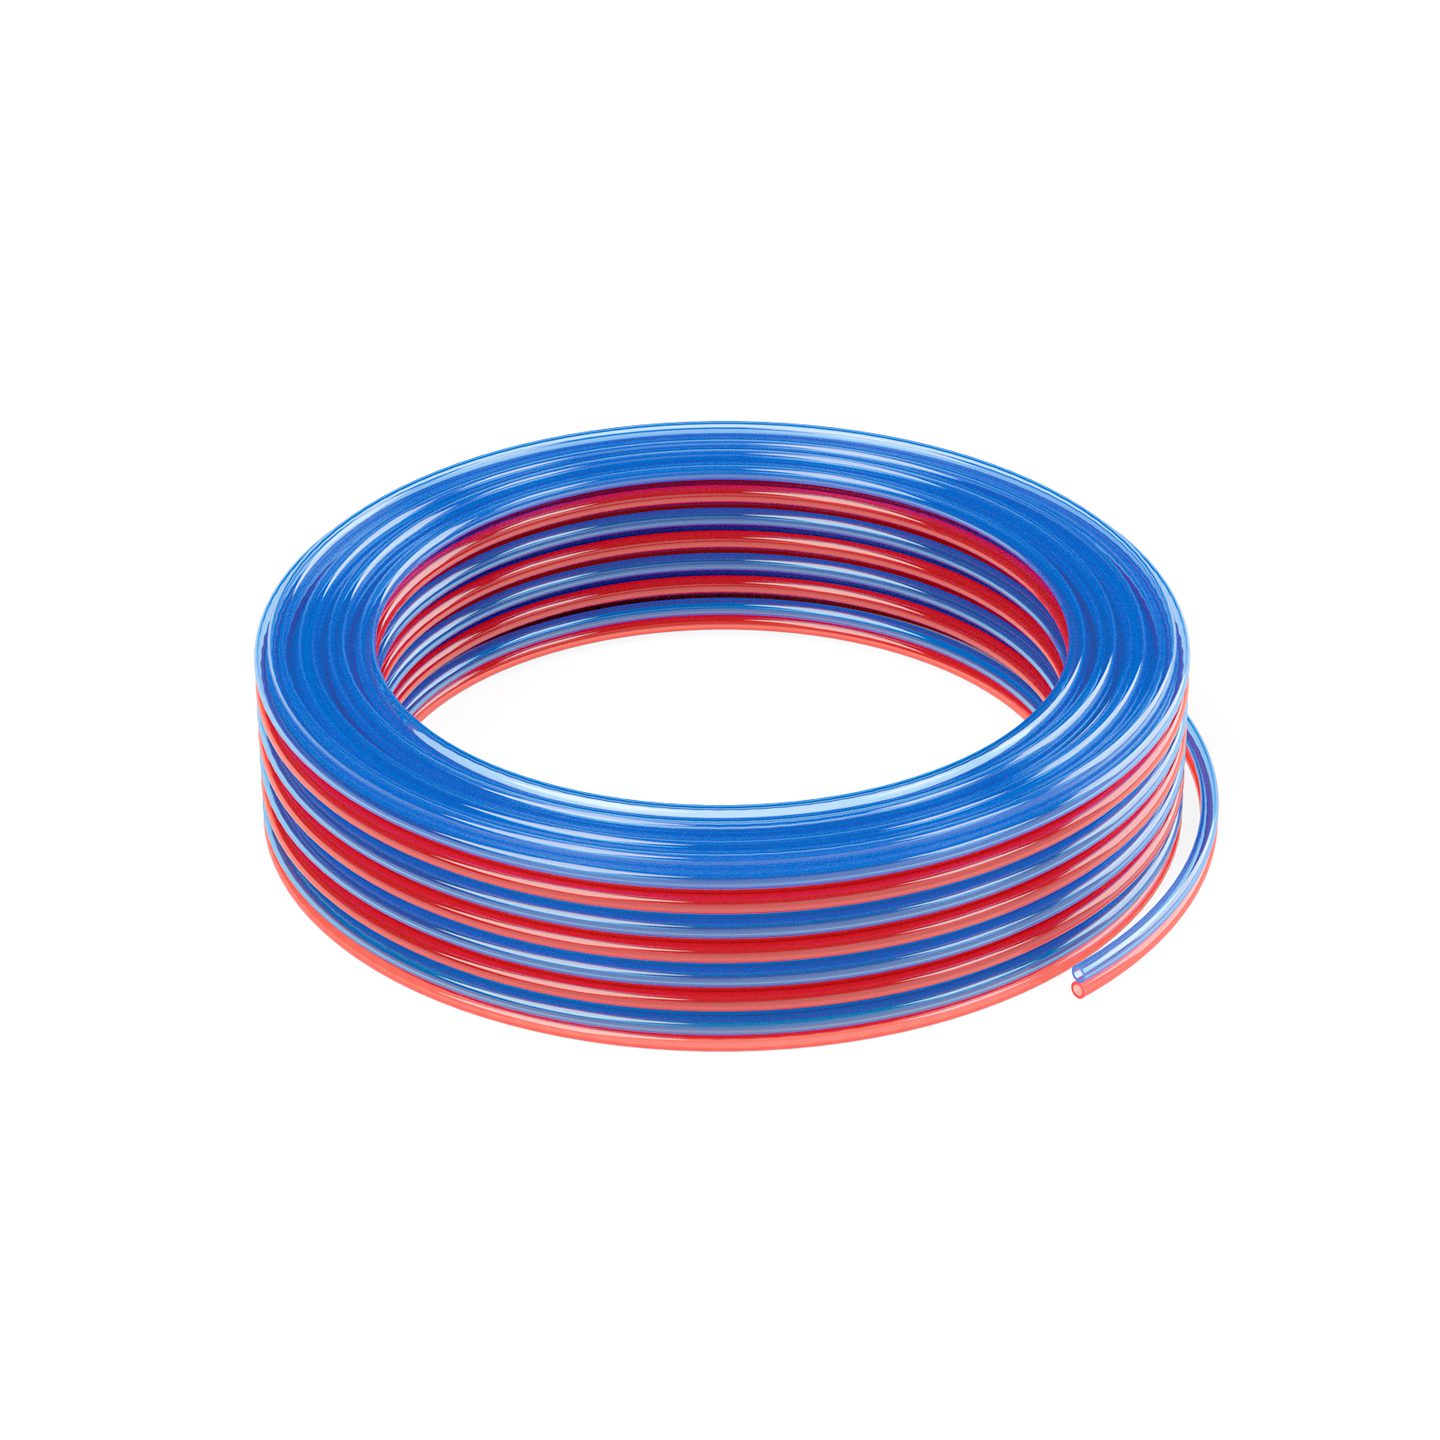 Moving monthly All 8 mm (5/16") Bonded Polyurethane Tubing - 100 ft Roll - Blick Industries